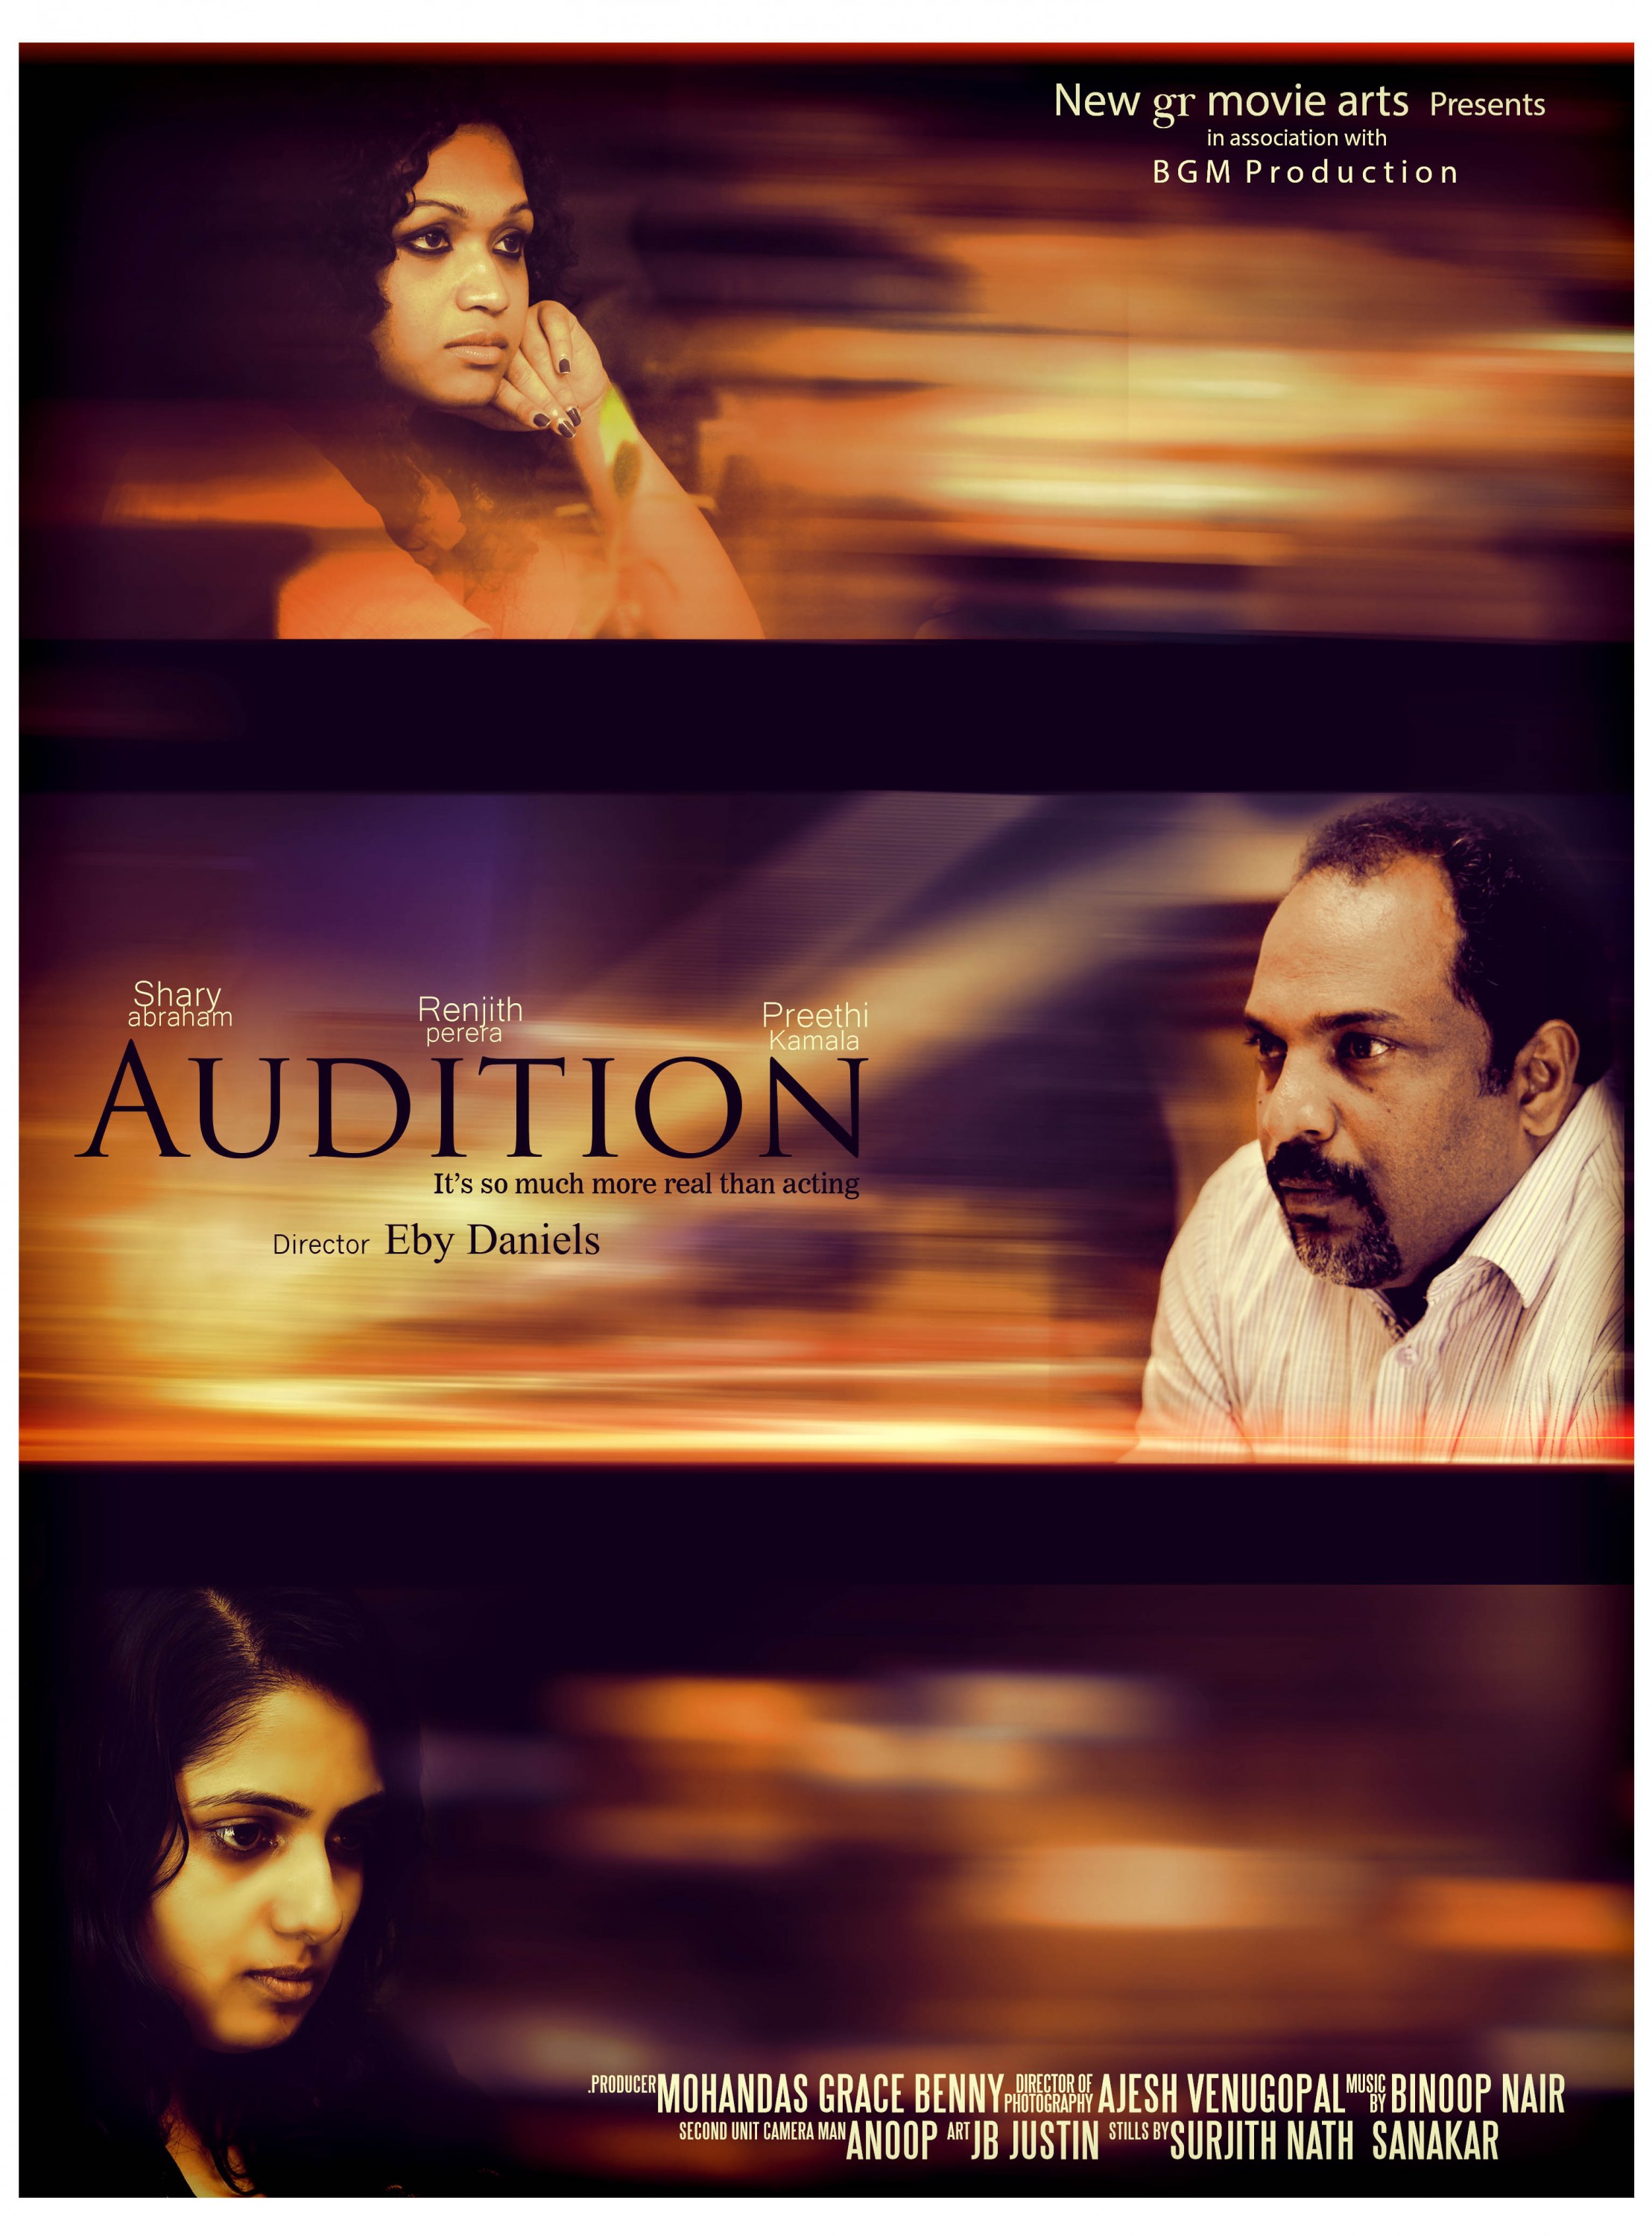 Mega Sized Movie Poster Image for Audition